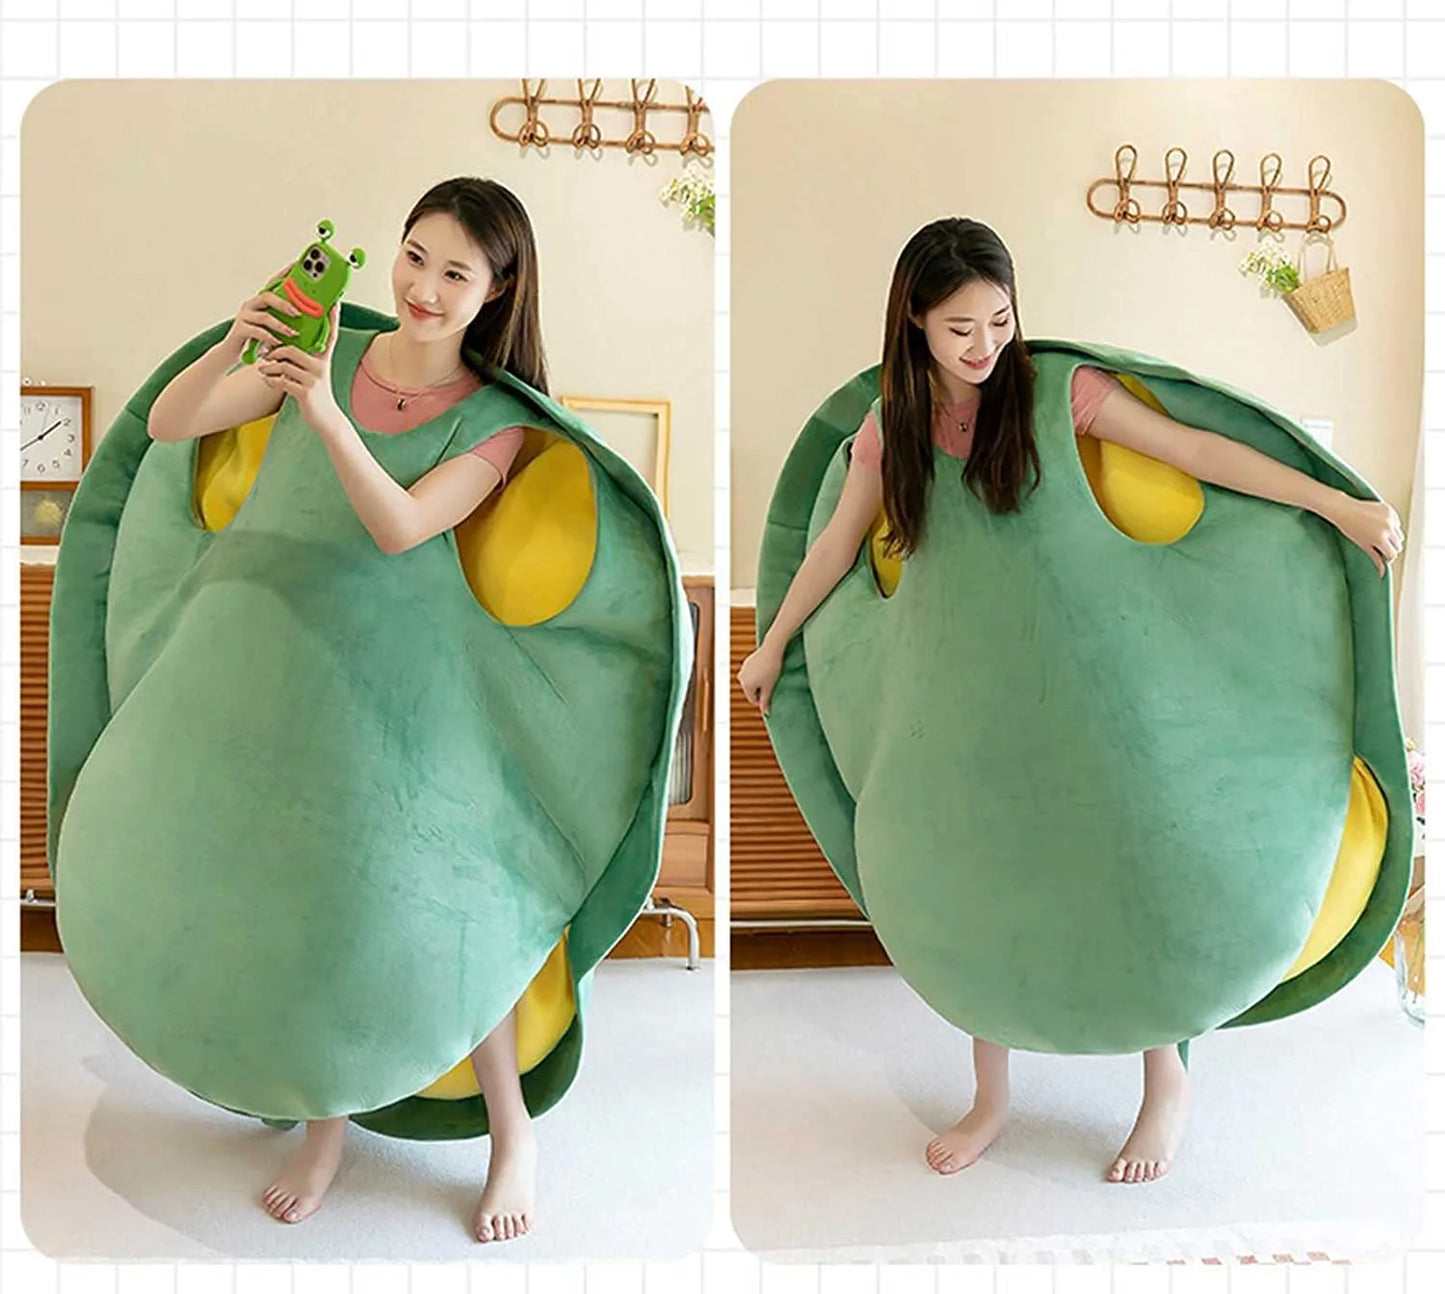 AmoorFemme Wearable Turtle Shell Pillows